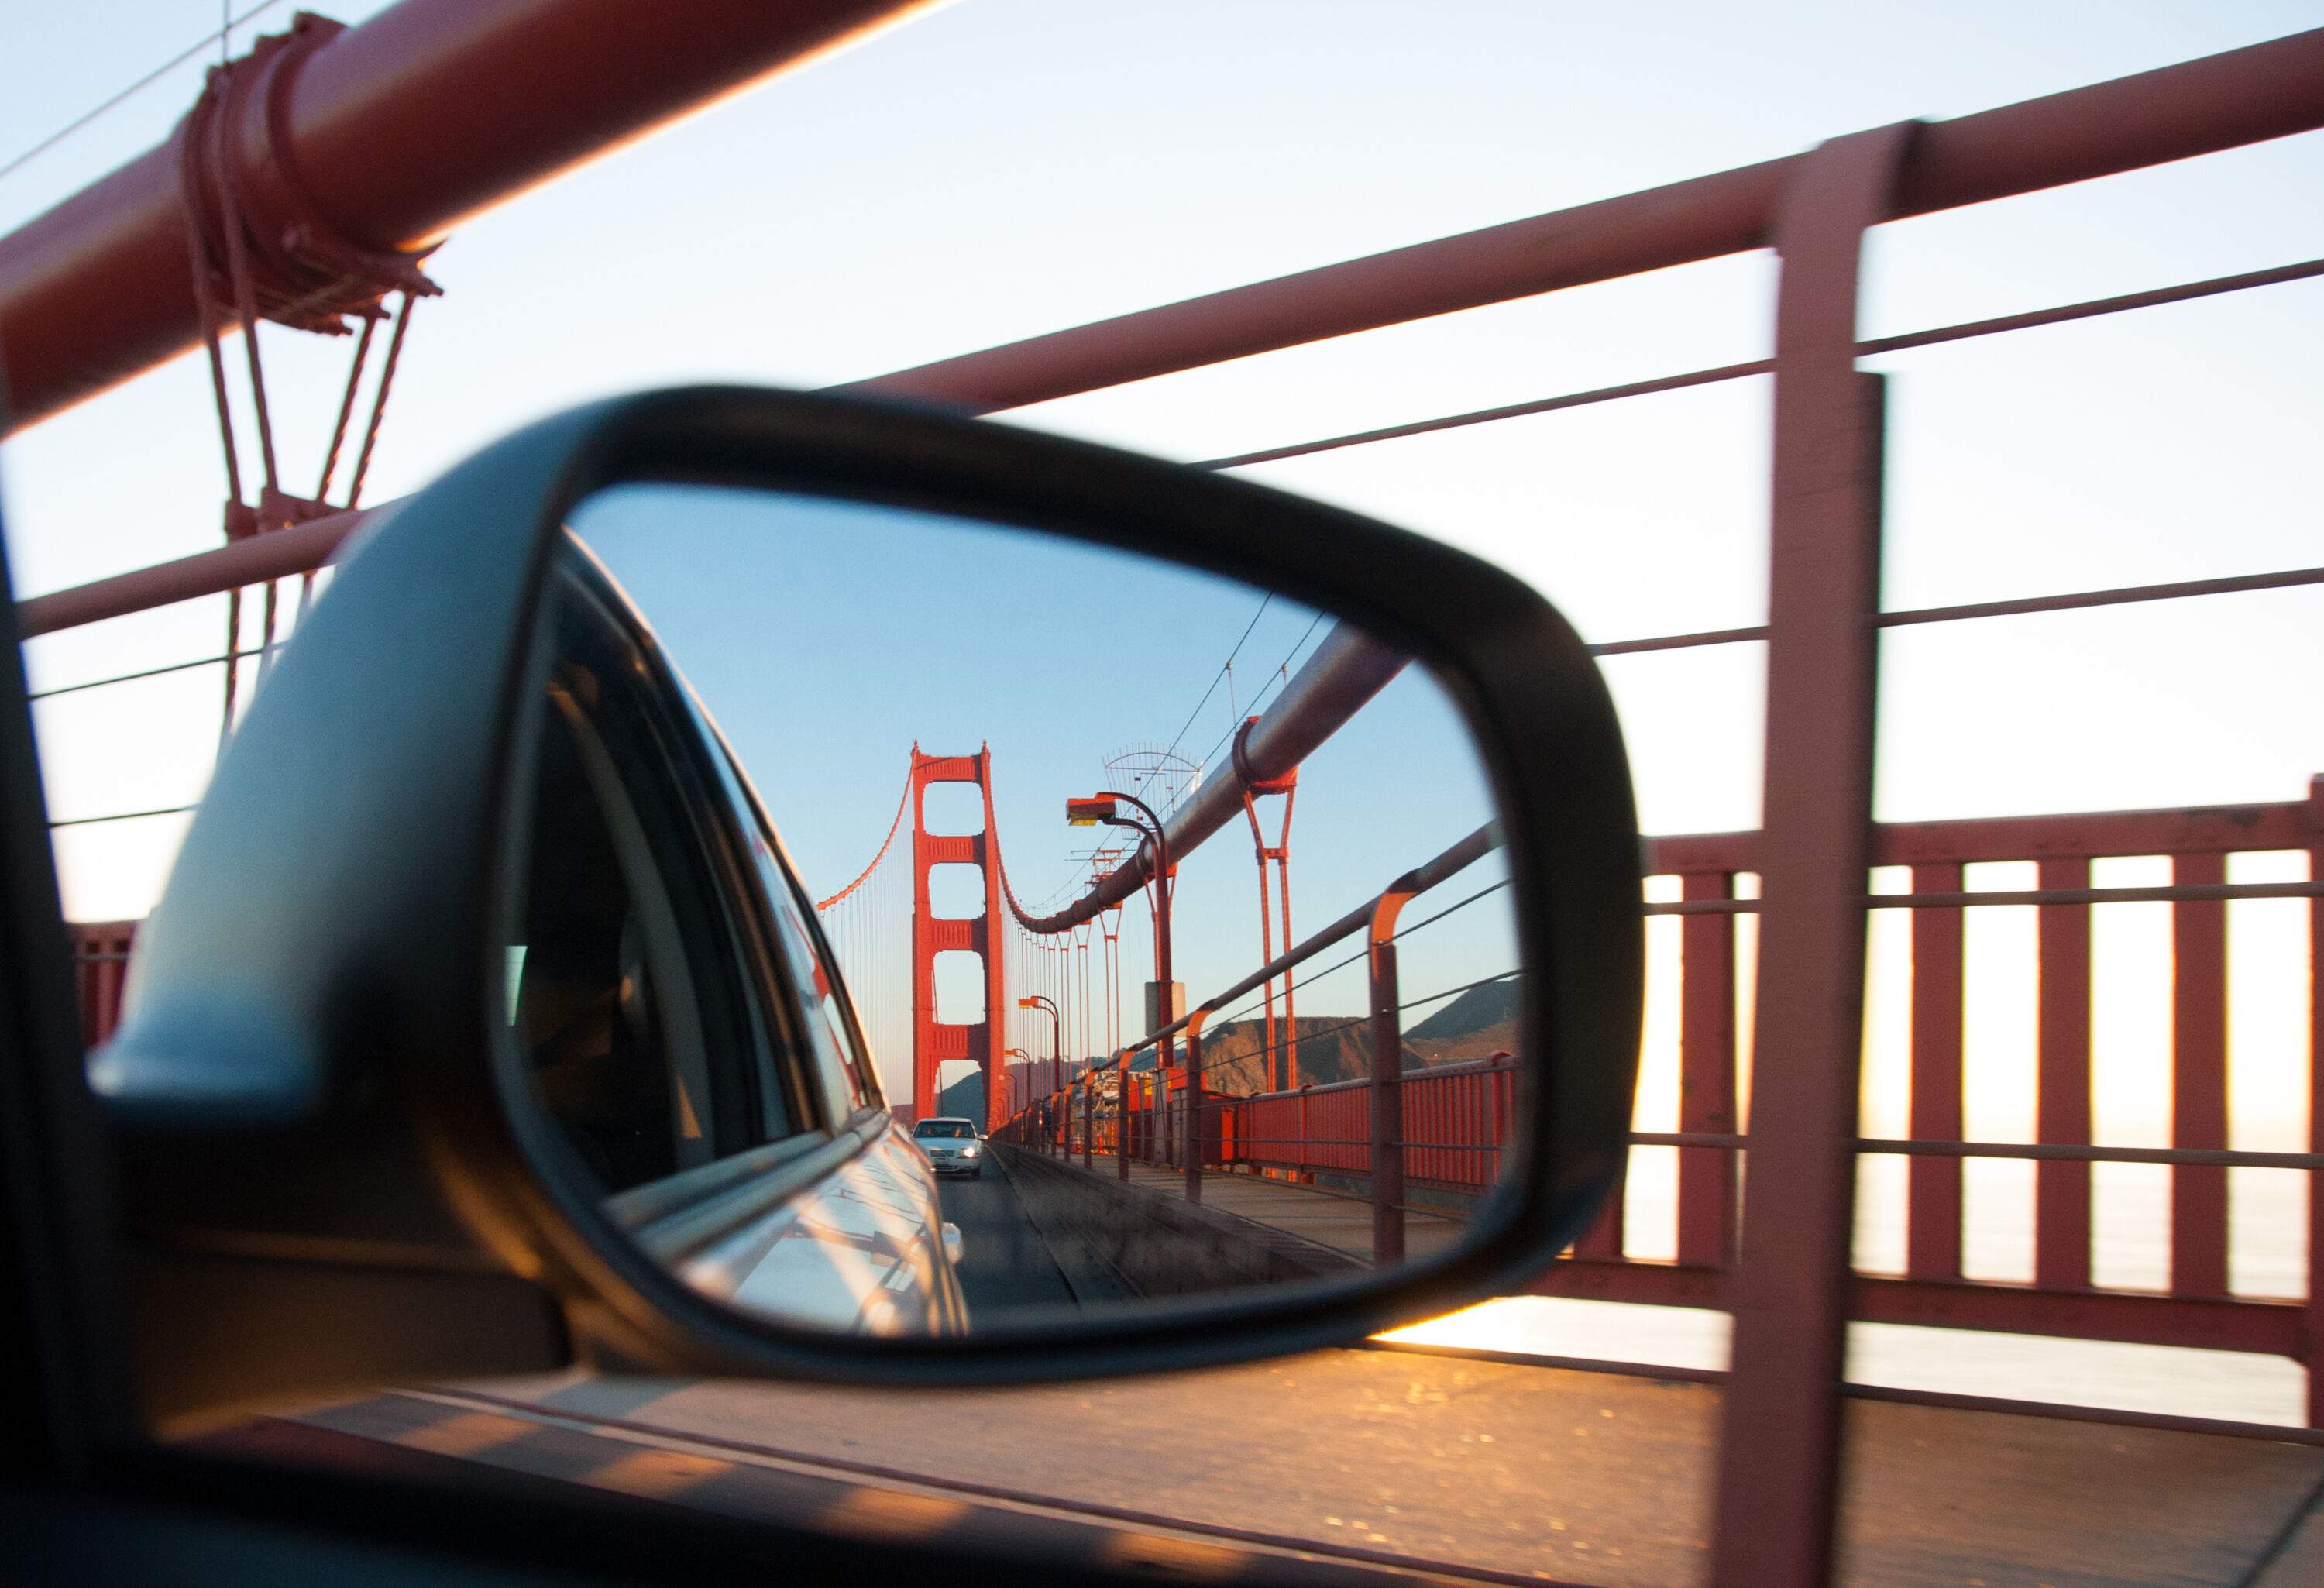 The iconic Golden Gate Bridge is captured in the reflection of a car's side mirror.